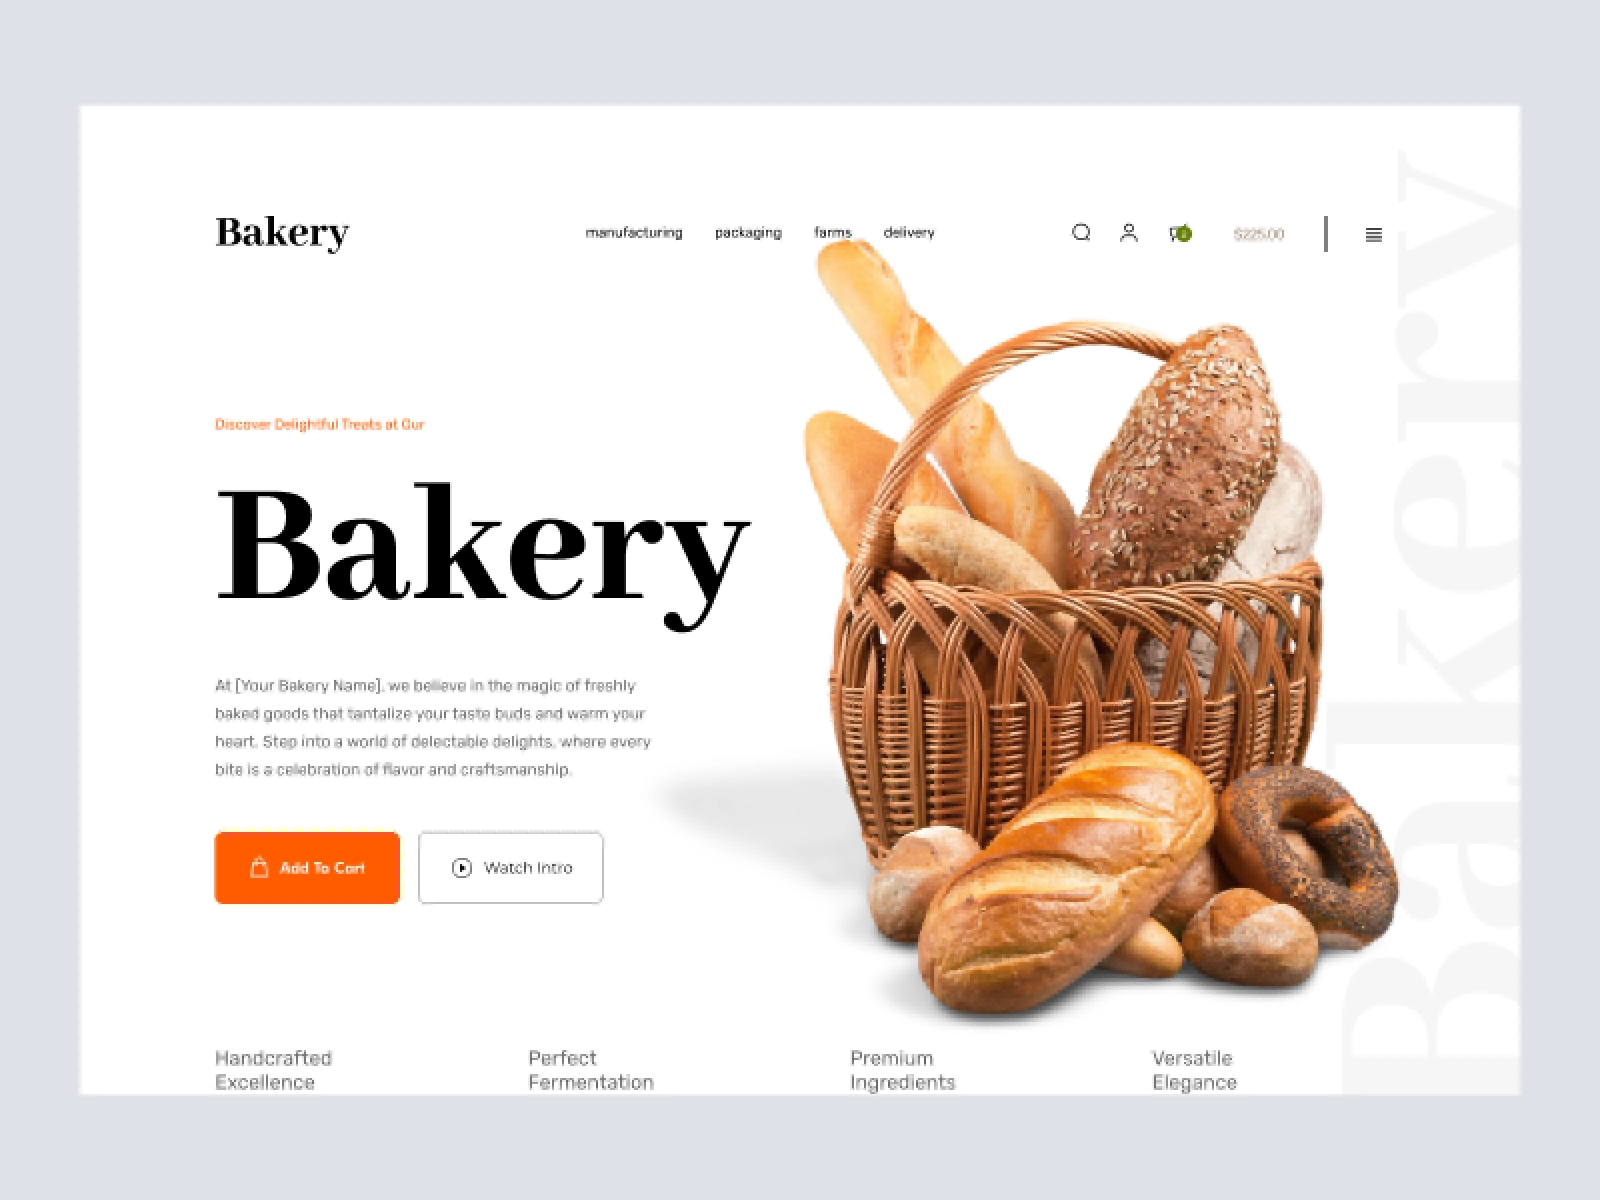 Bakery Shopify Store Design for Adobe XD - screen 1